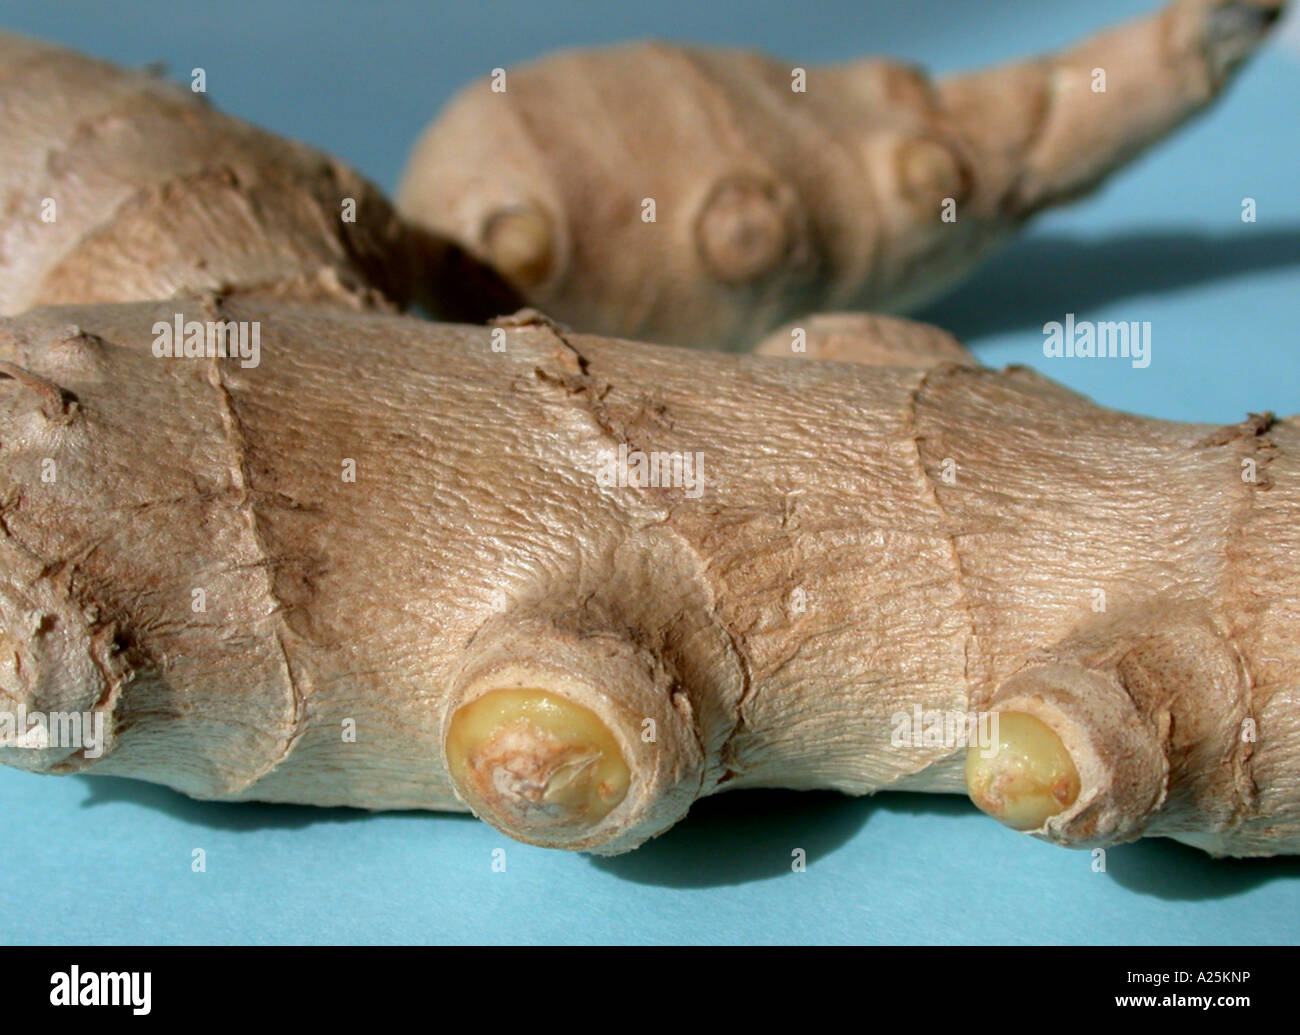 ginger, common ginger, cooking ginger, Canton ginger (Zingiber officinale), rhizome Stock Photo